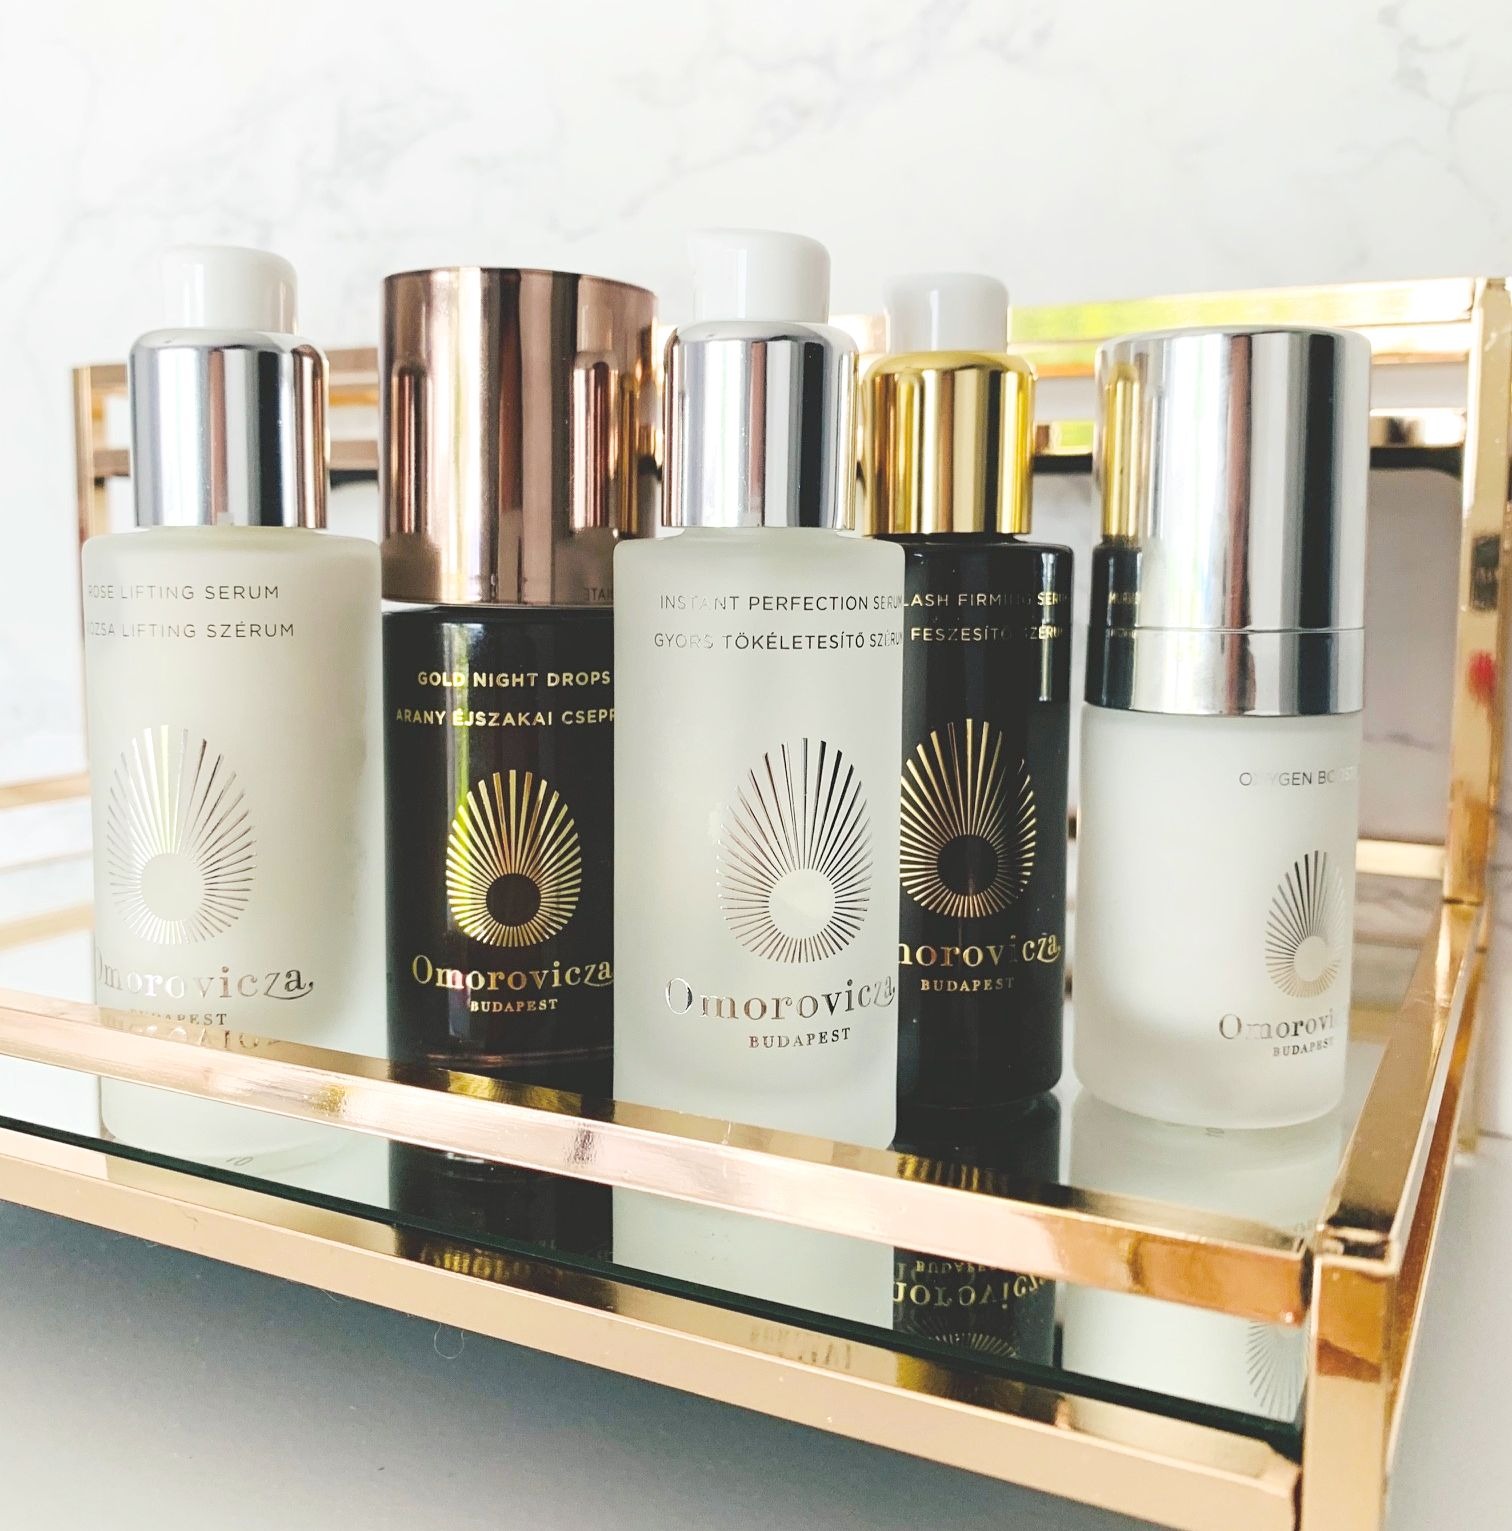 Which Omorovicza Serum is best for you?